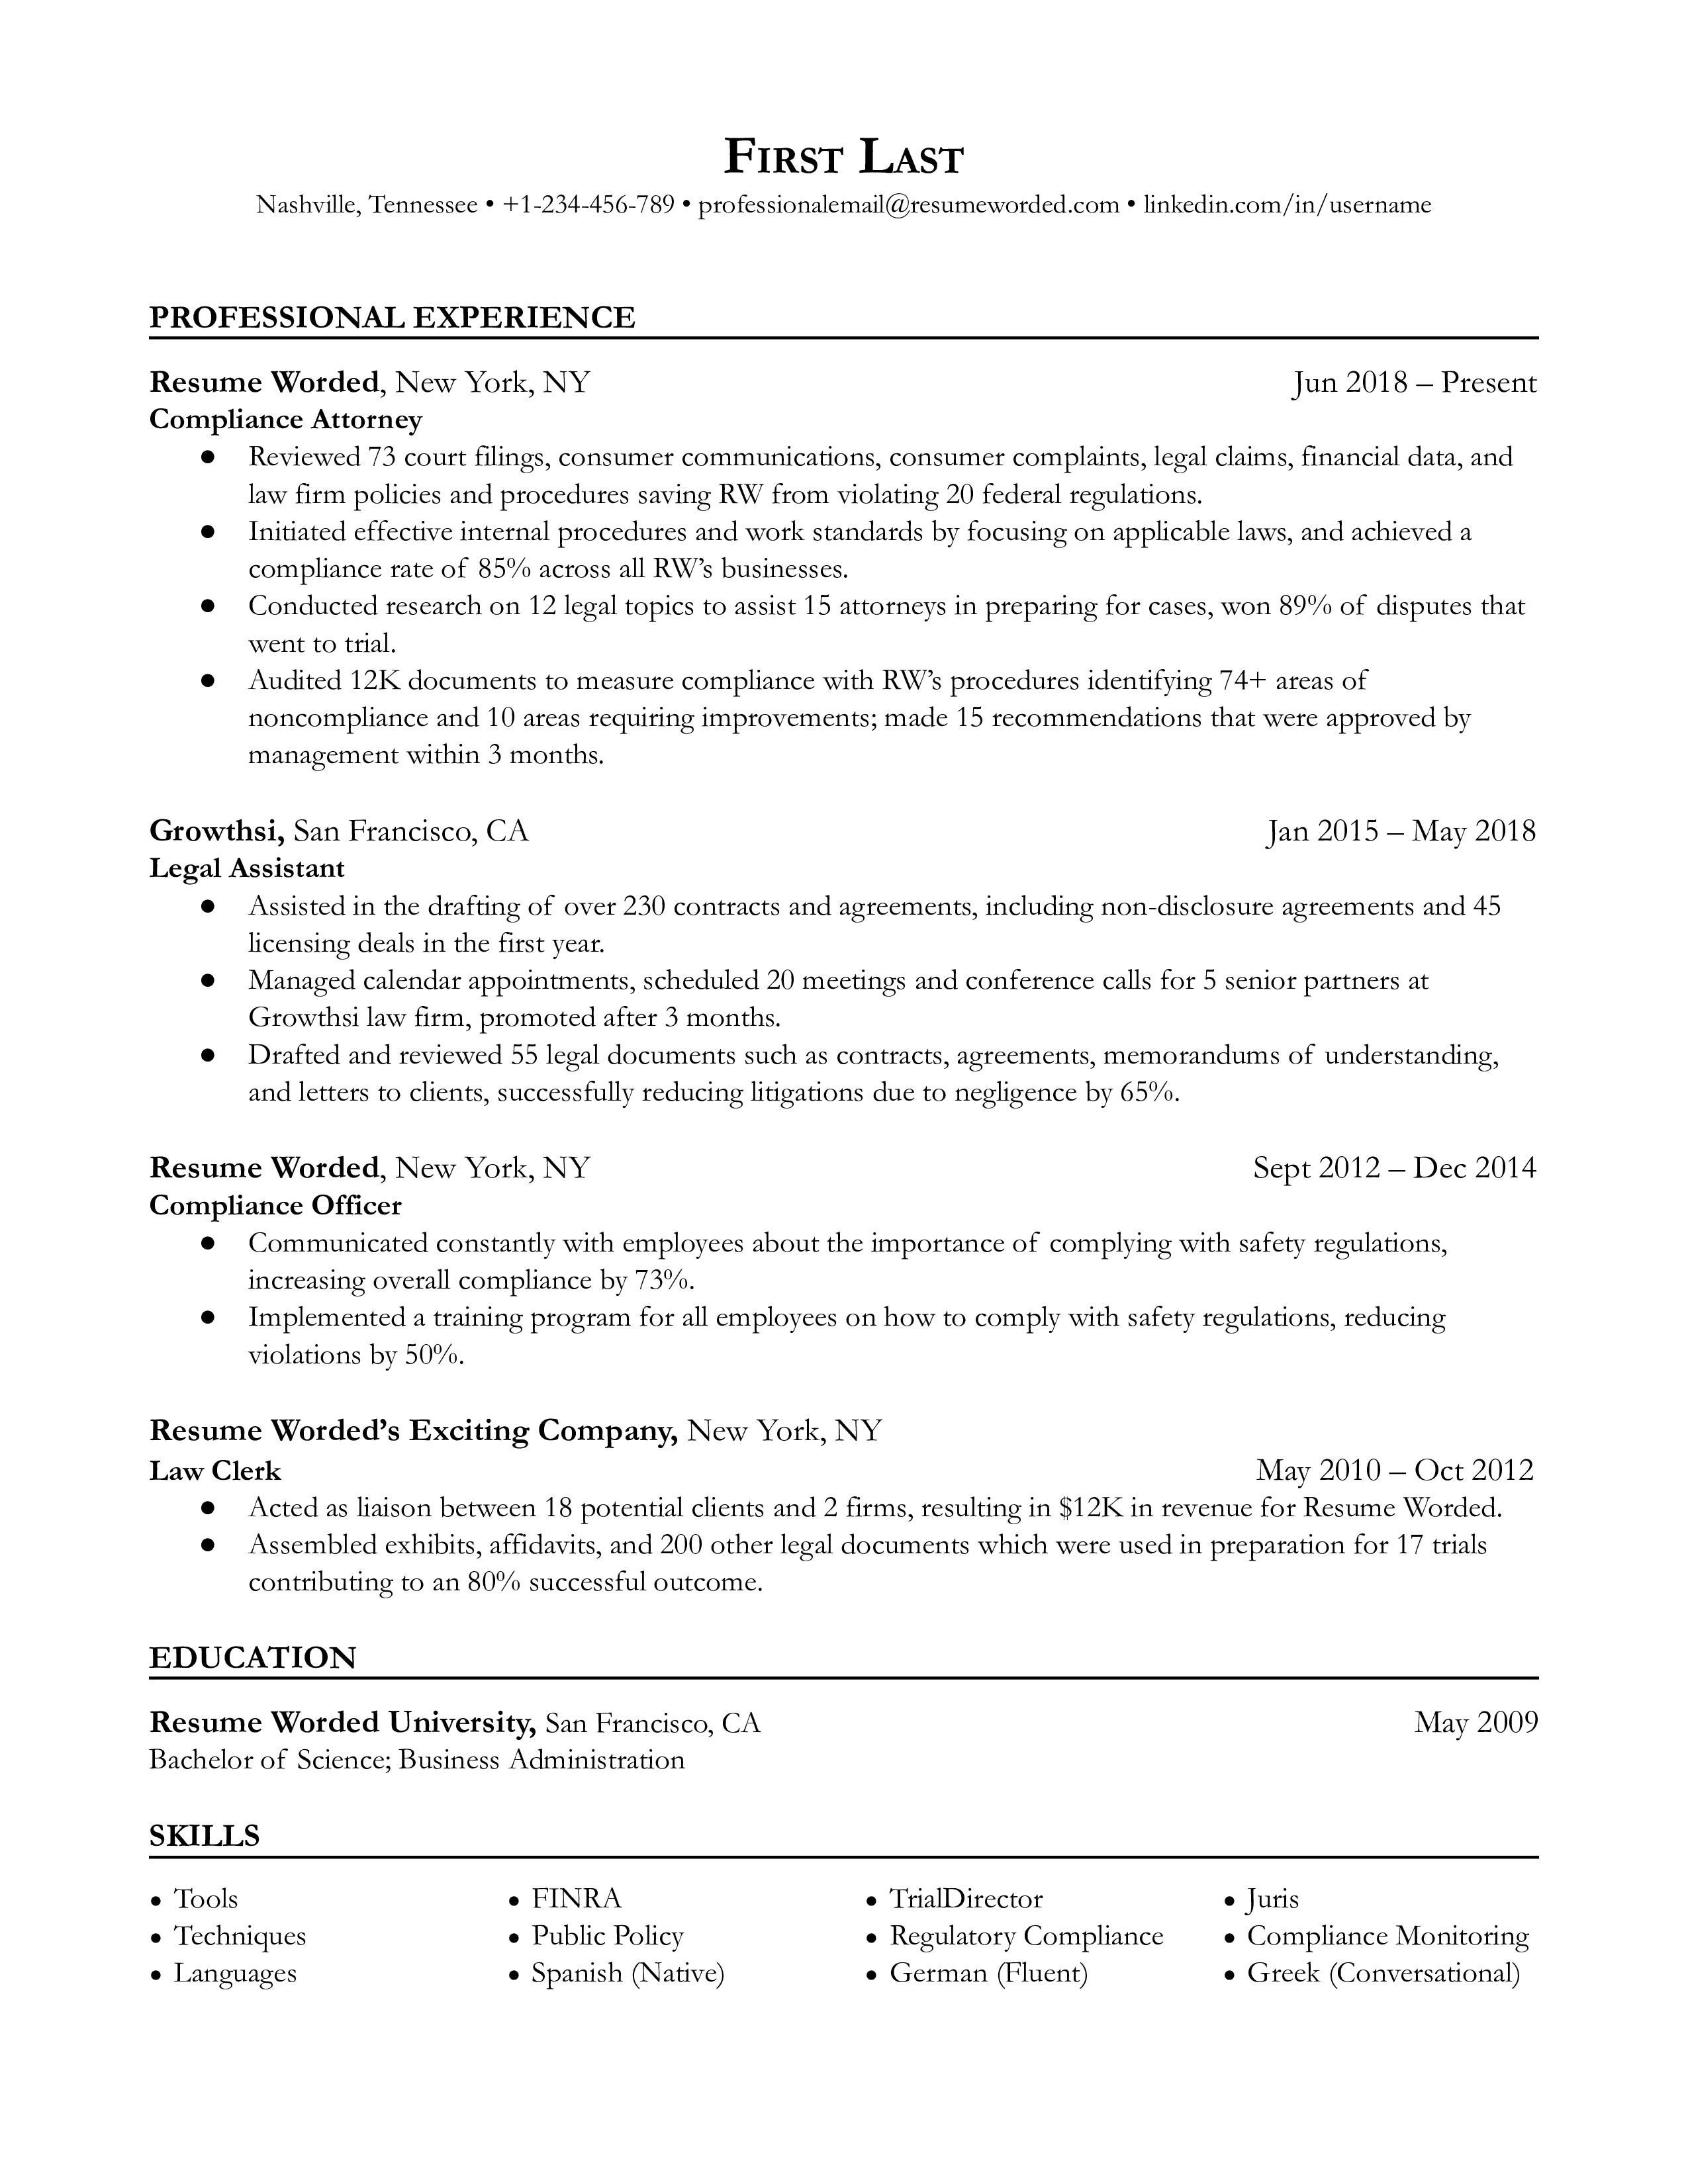 A compliance attorney resume sample that highlights the applicant’s cartifications and quantifiable success.